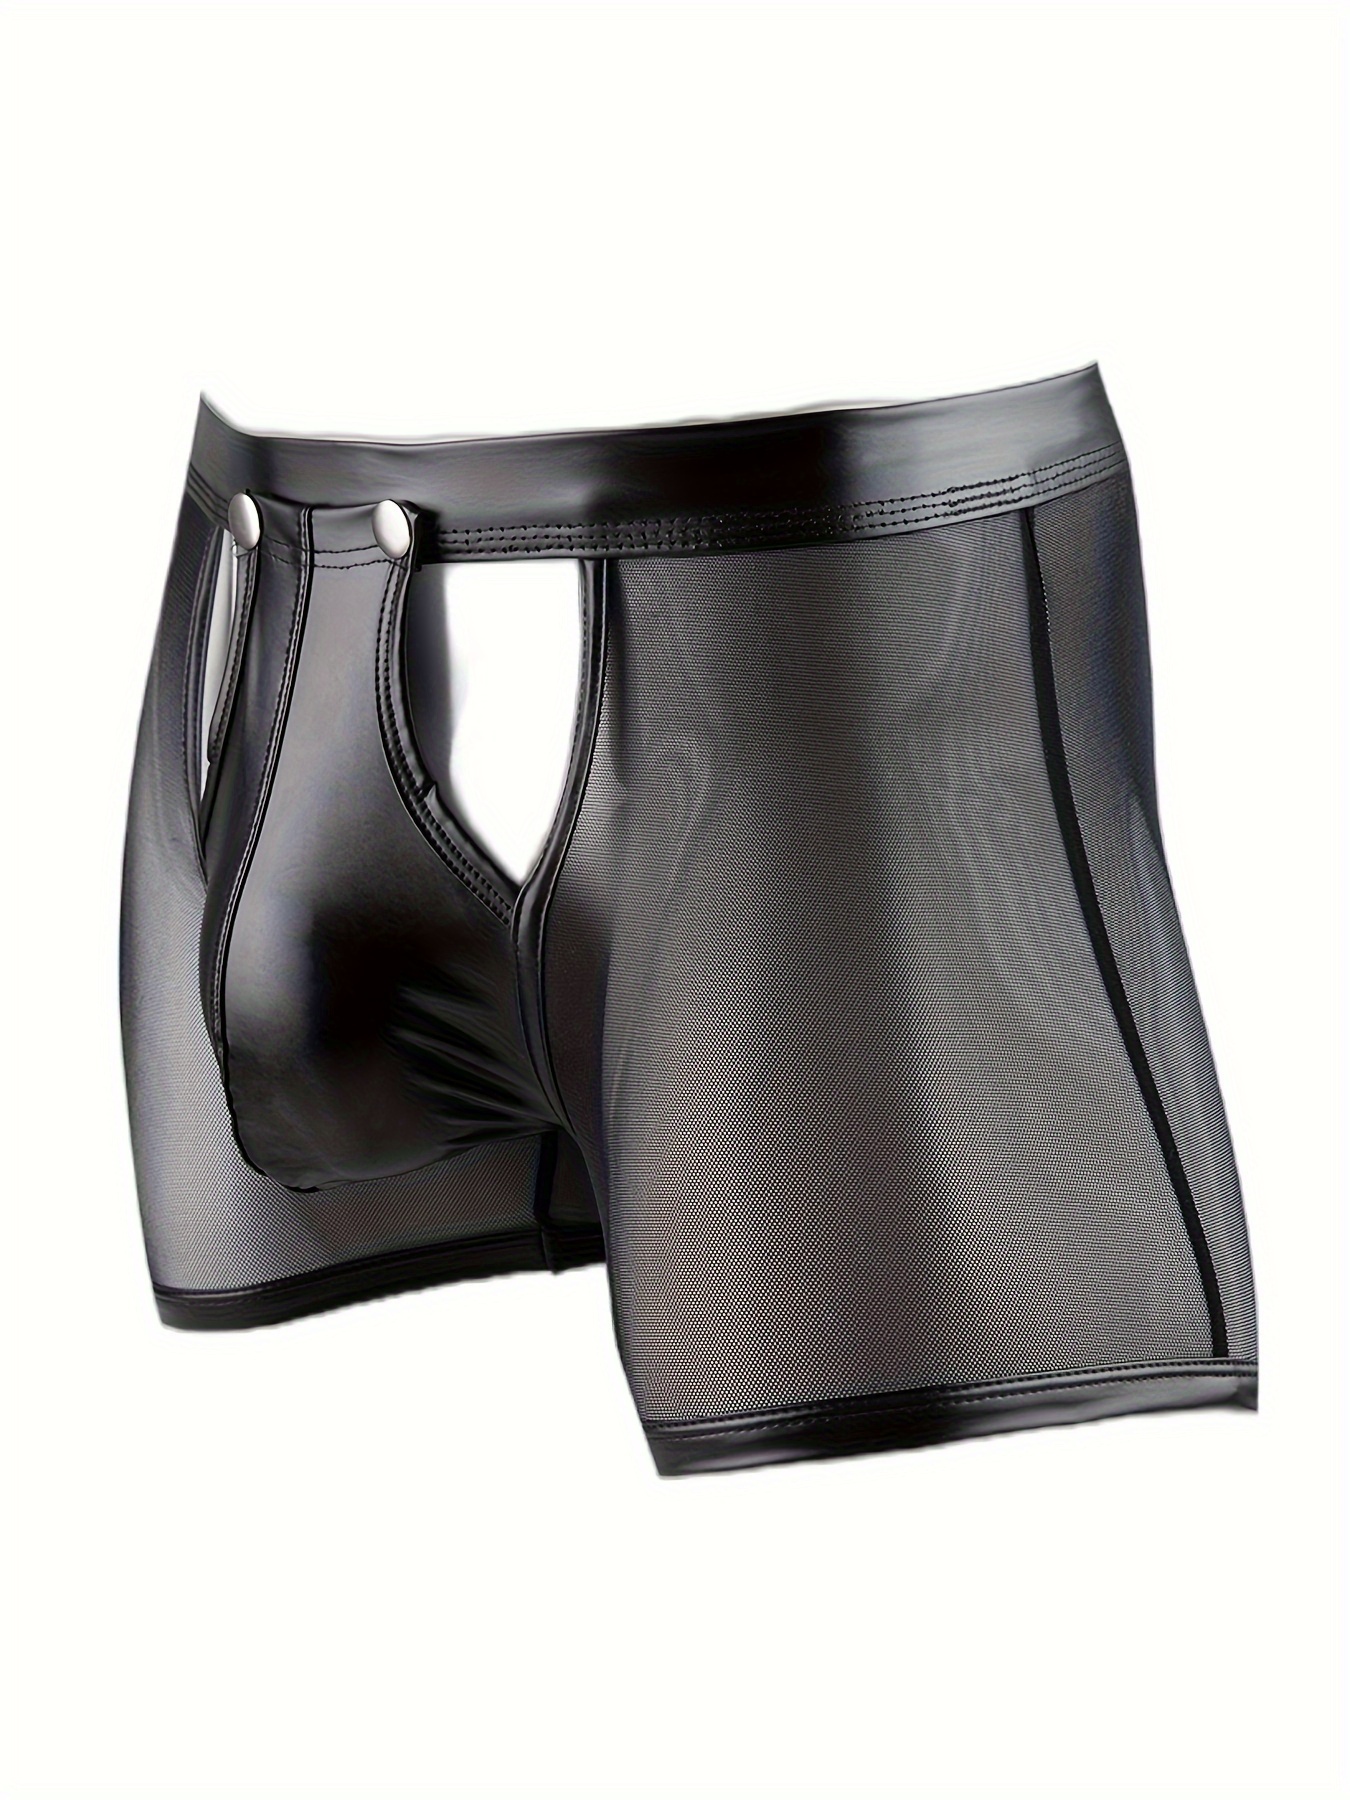 Asian Size Latex Shorts Men's Rubber Briefs Underwear With Cock And Ball  Sheath Latex Panties, Elephant Nose Cover Sexy Panties